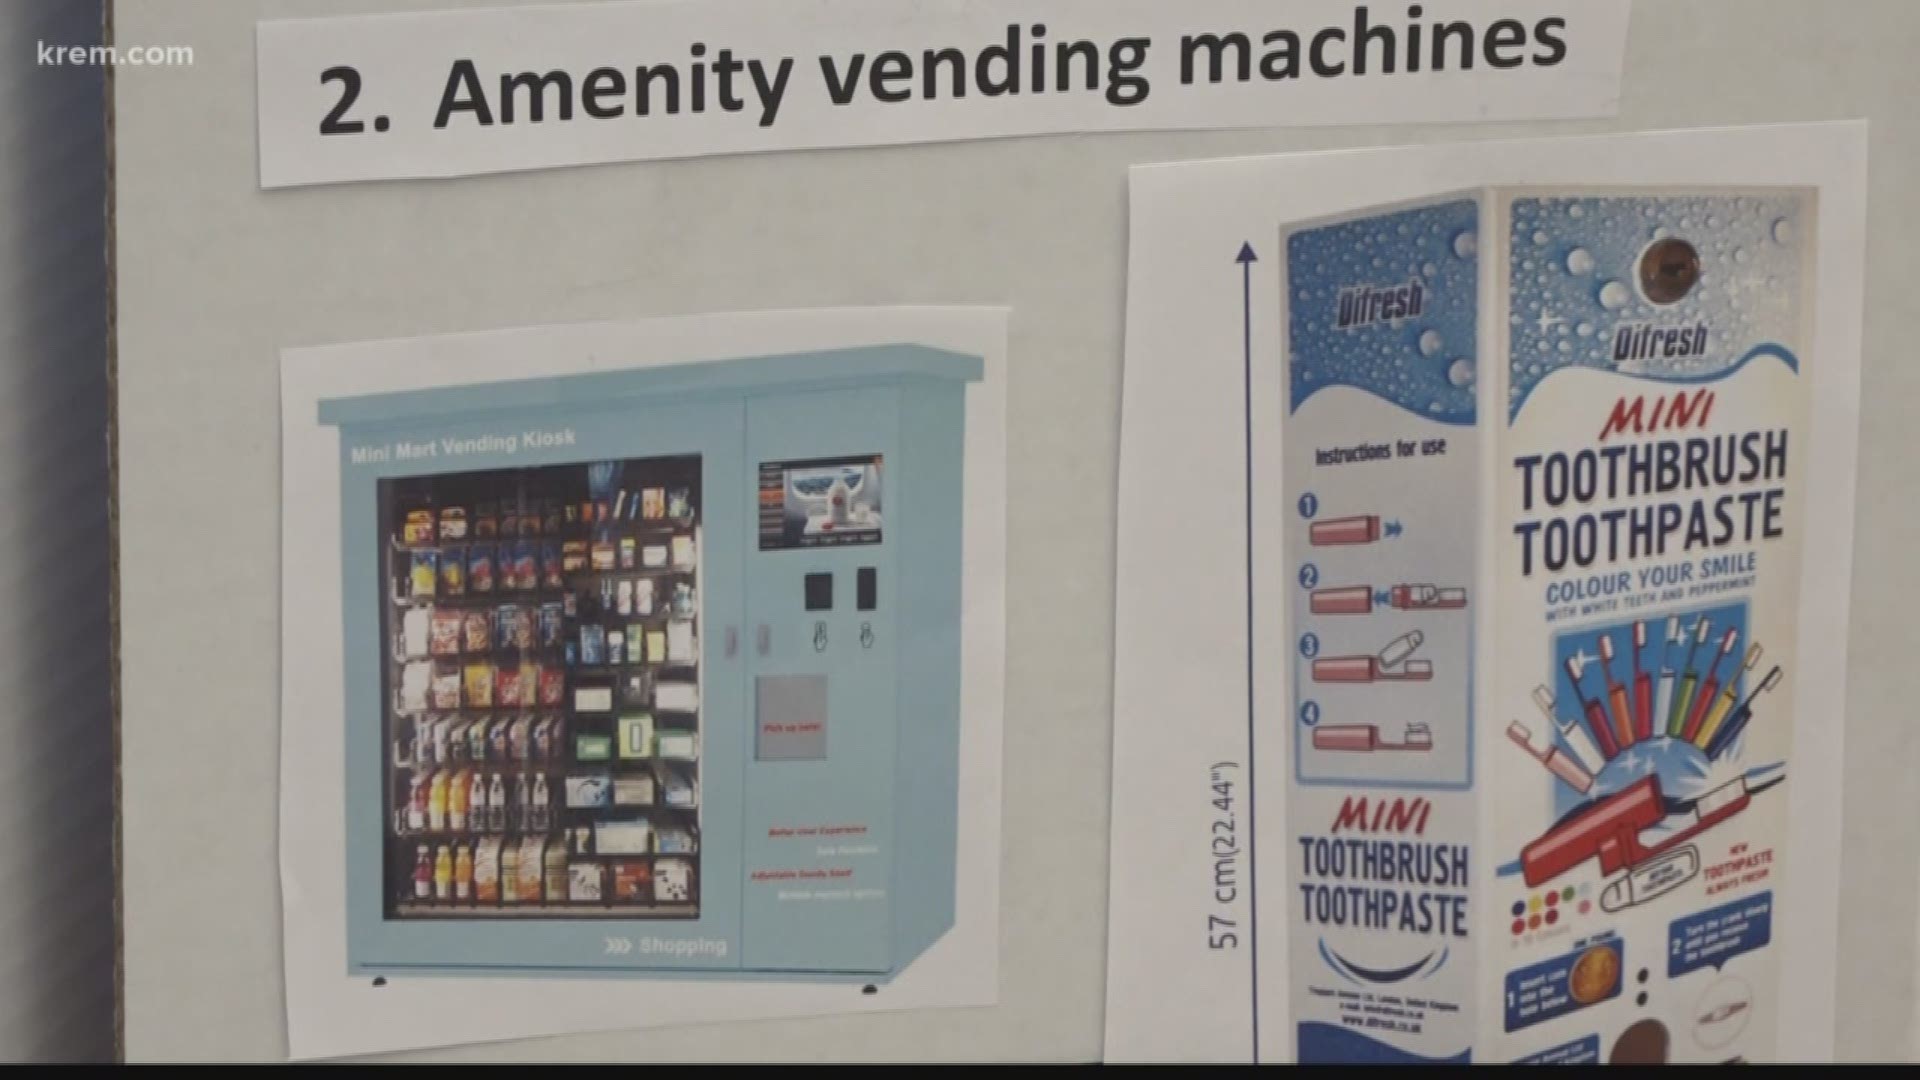 The machines for amenities would hold items such as lip balm, lotion and feminine hygiene products.